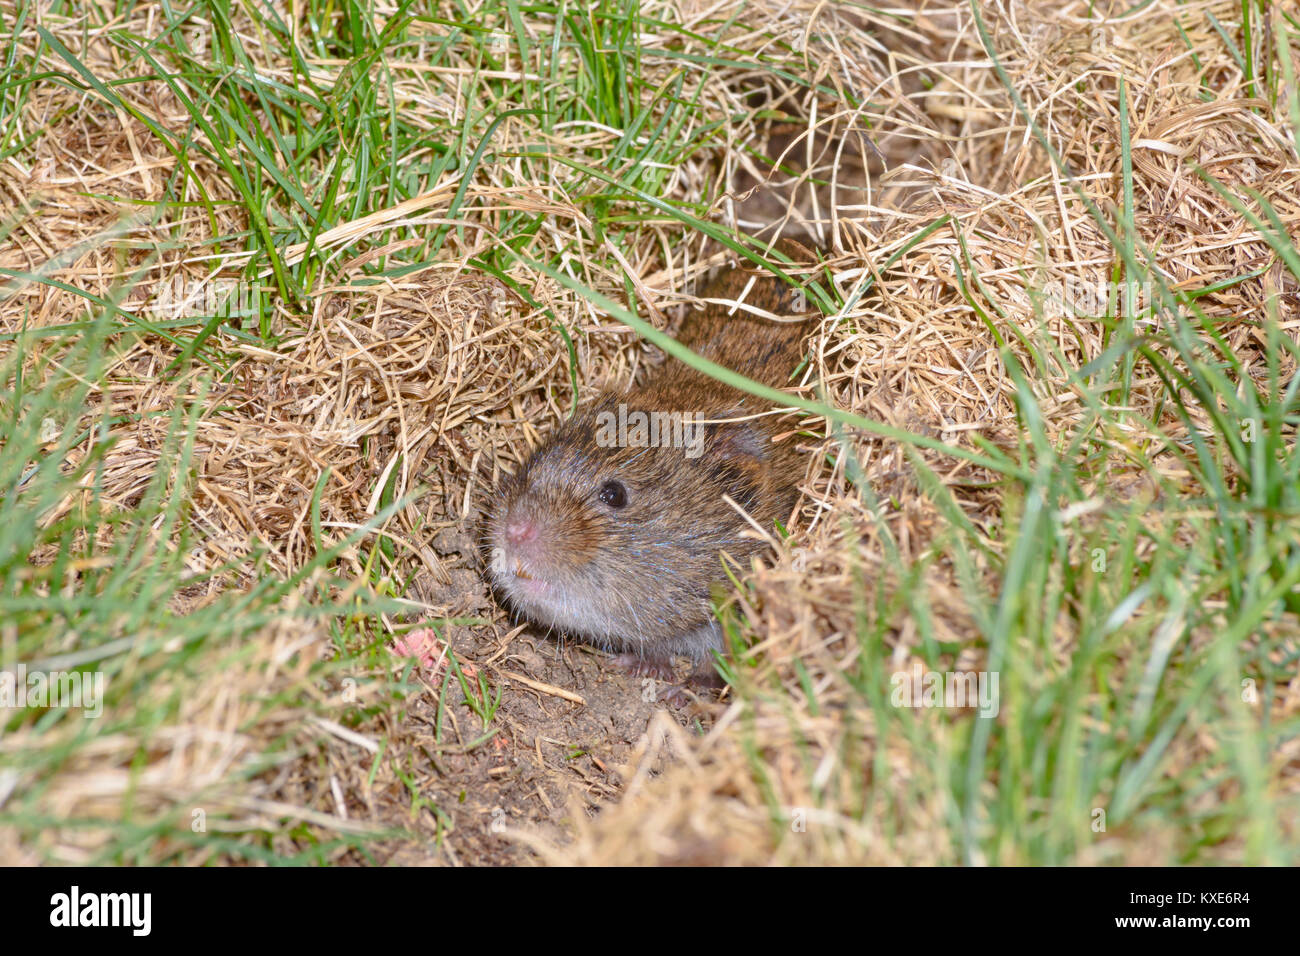 Meadow Vole carefully peering out of it's grassy runway, Castle Rock Colorado US Stock Photo